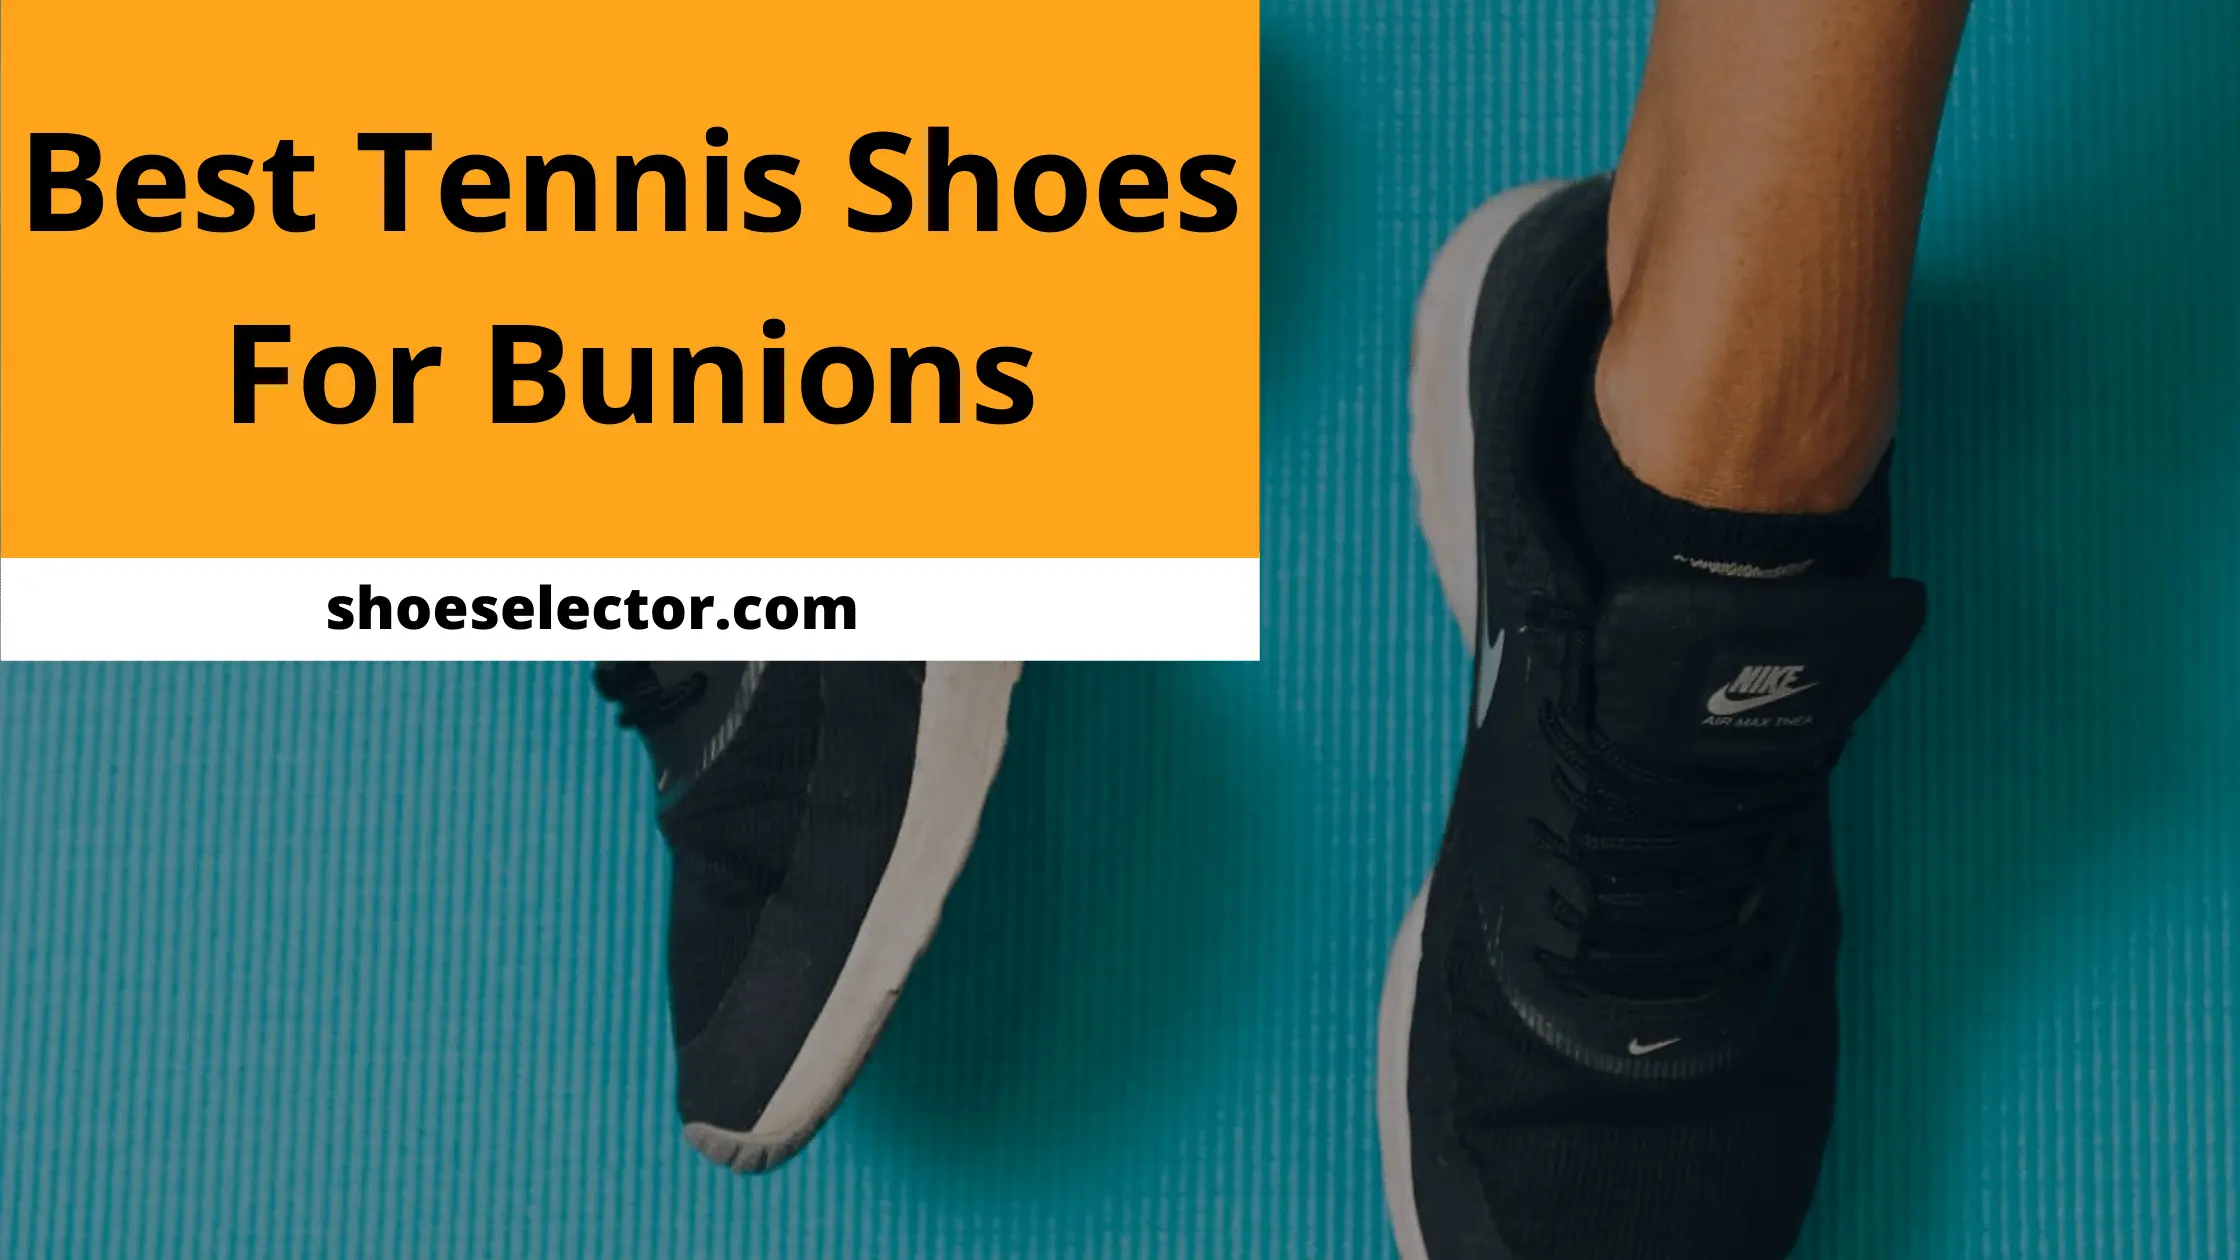 Best Tennis Shoes For Bunions - Stylish Shoes